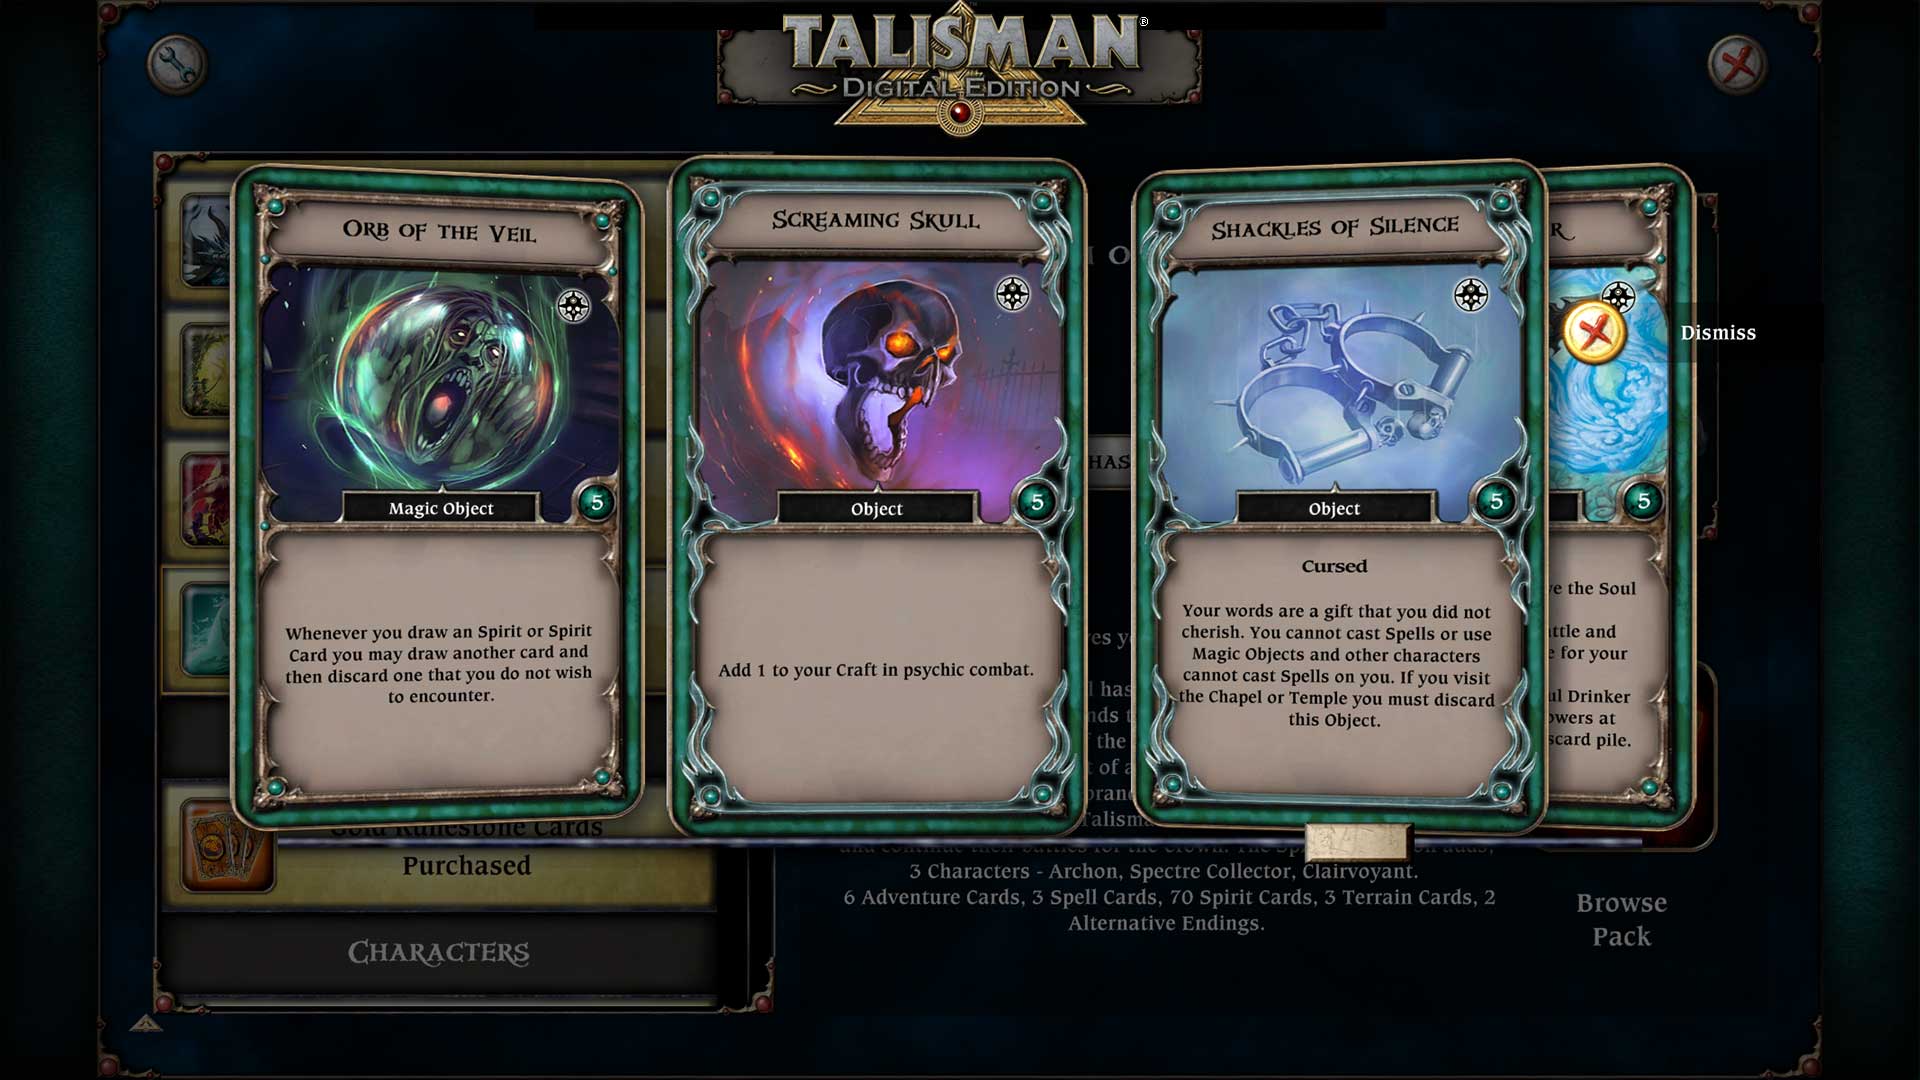 Talisman - The Realm of Souls Expansion DLC Steam CD Key $2.16